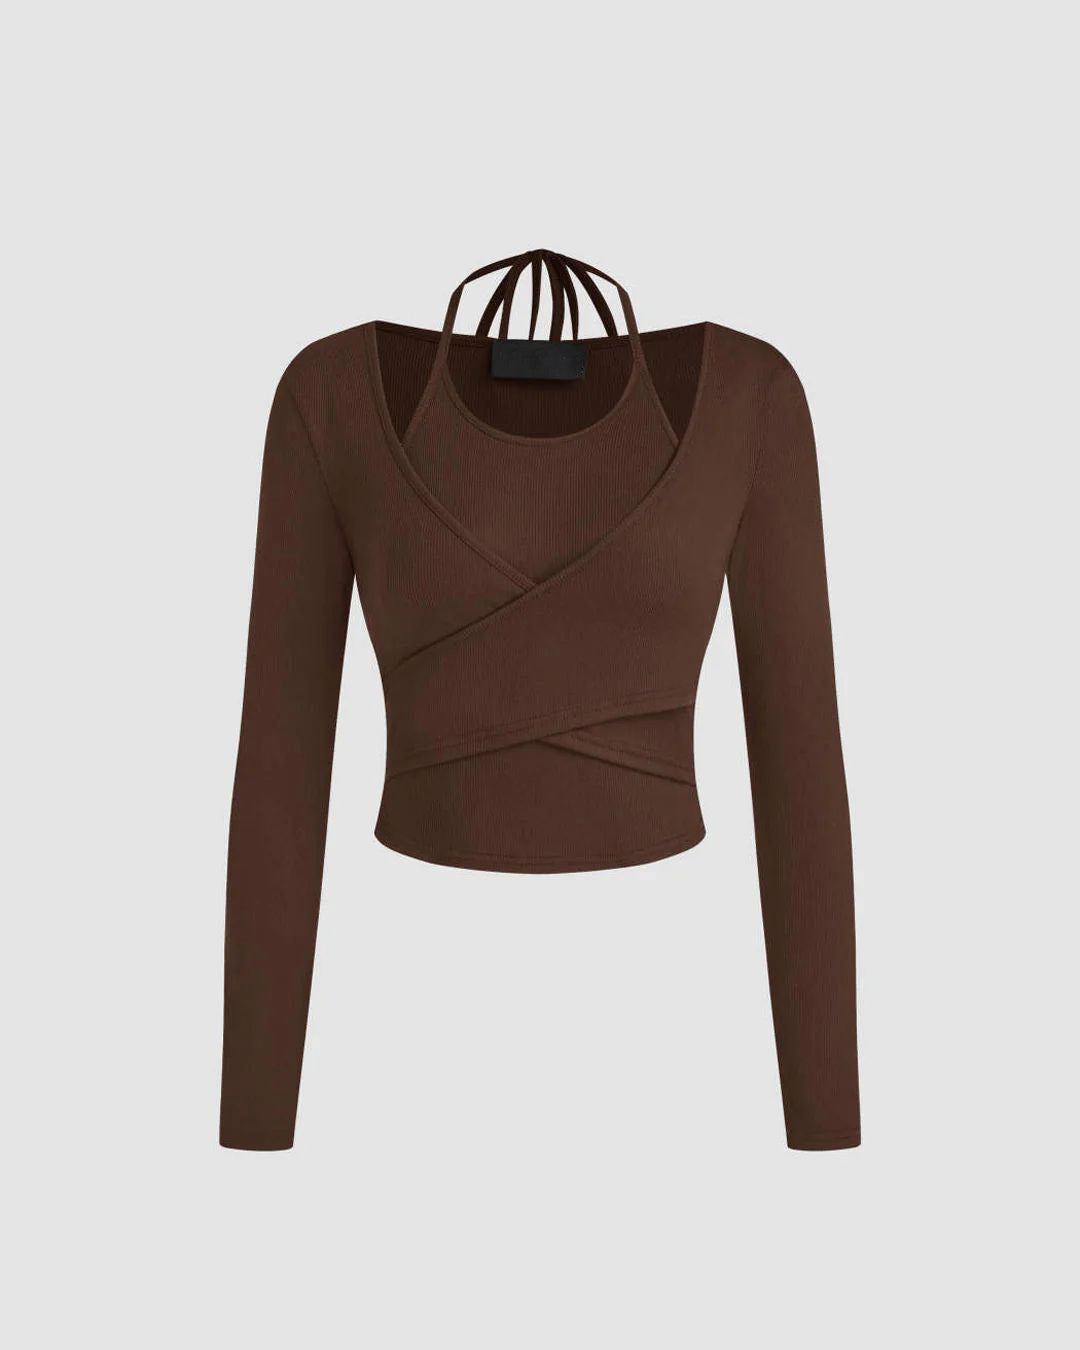 RIBBED HALTER NECK TOP,brown, casual, fitted, halter neck, knitted, long sleeves, regular, ribbed, skinny fit, solid, streetwear, stretchable, summer, tops, topwear,ribbed-halter-neck-top,Color- Brown
Fabric- Ribbed
Fit- Skinny Fit 
Length- Regular
Neck- Halter Neck
Sleeves- Long Sleeves
Print- Solid
Details- Overlap front panels